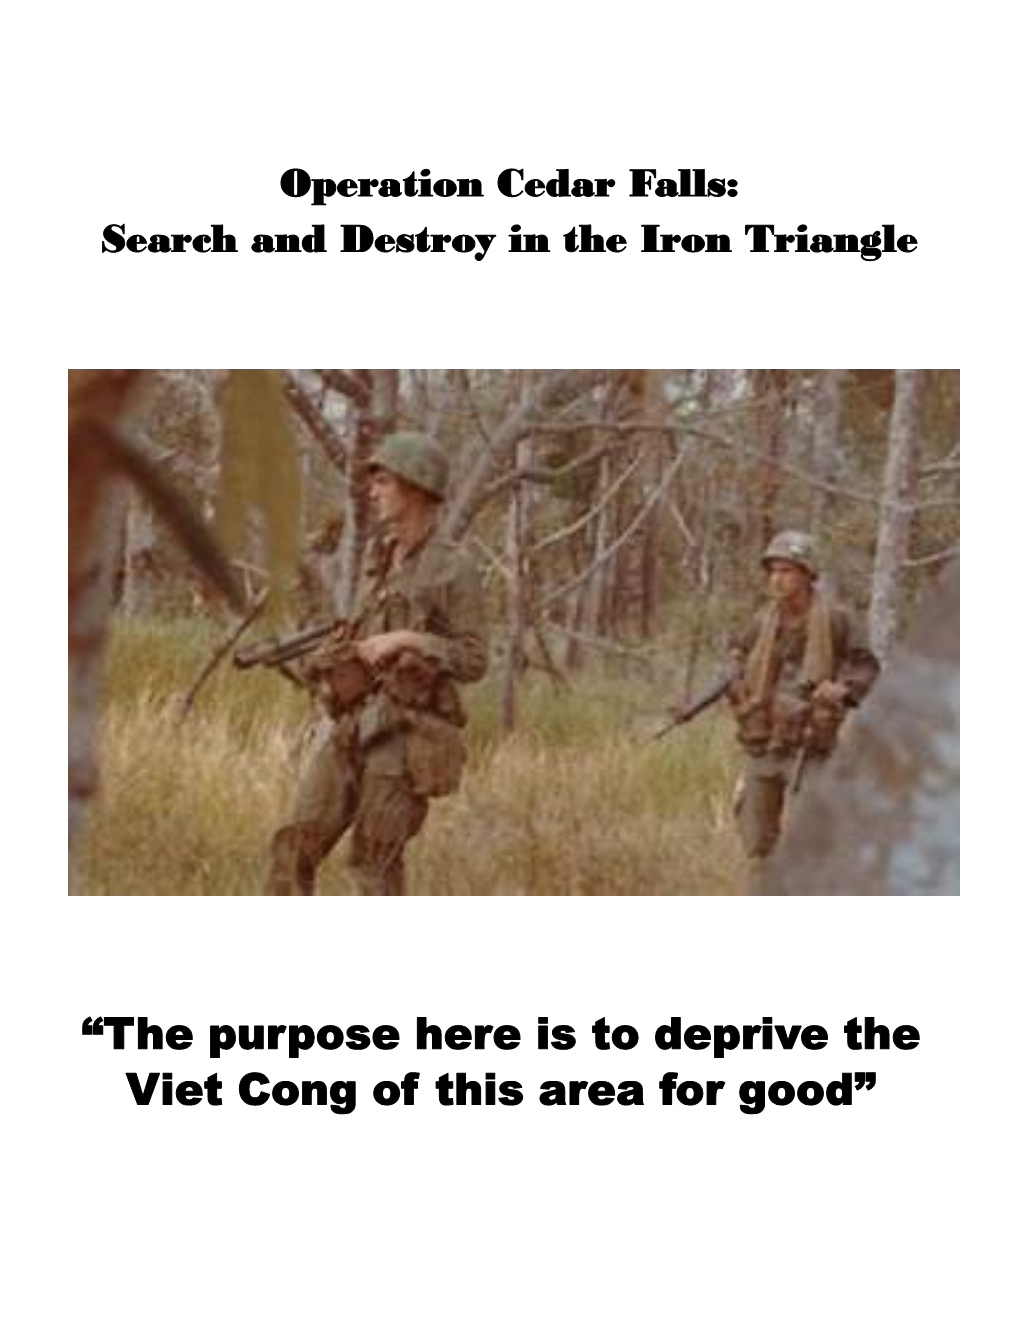 “The Purpose Here Is to Deprive the Viet Cong of This Area for Good”